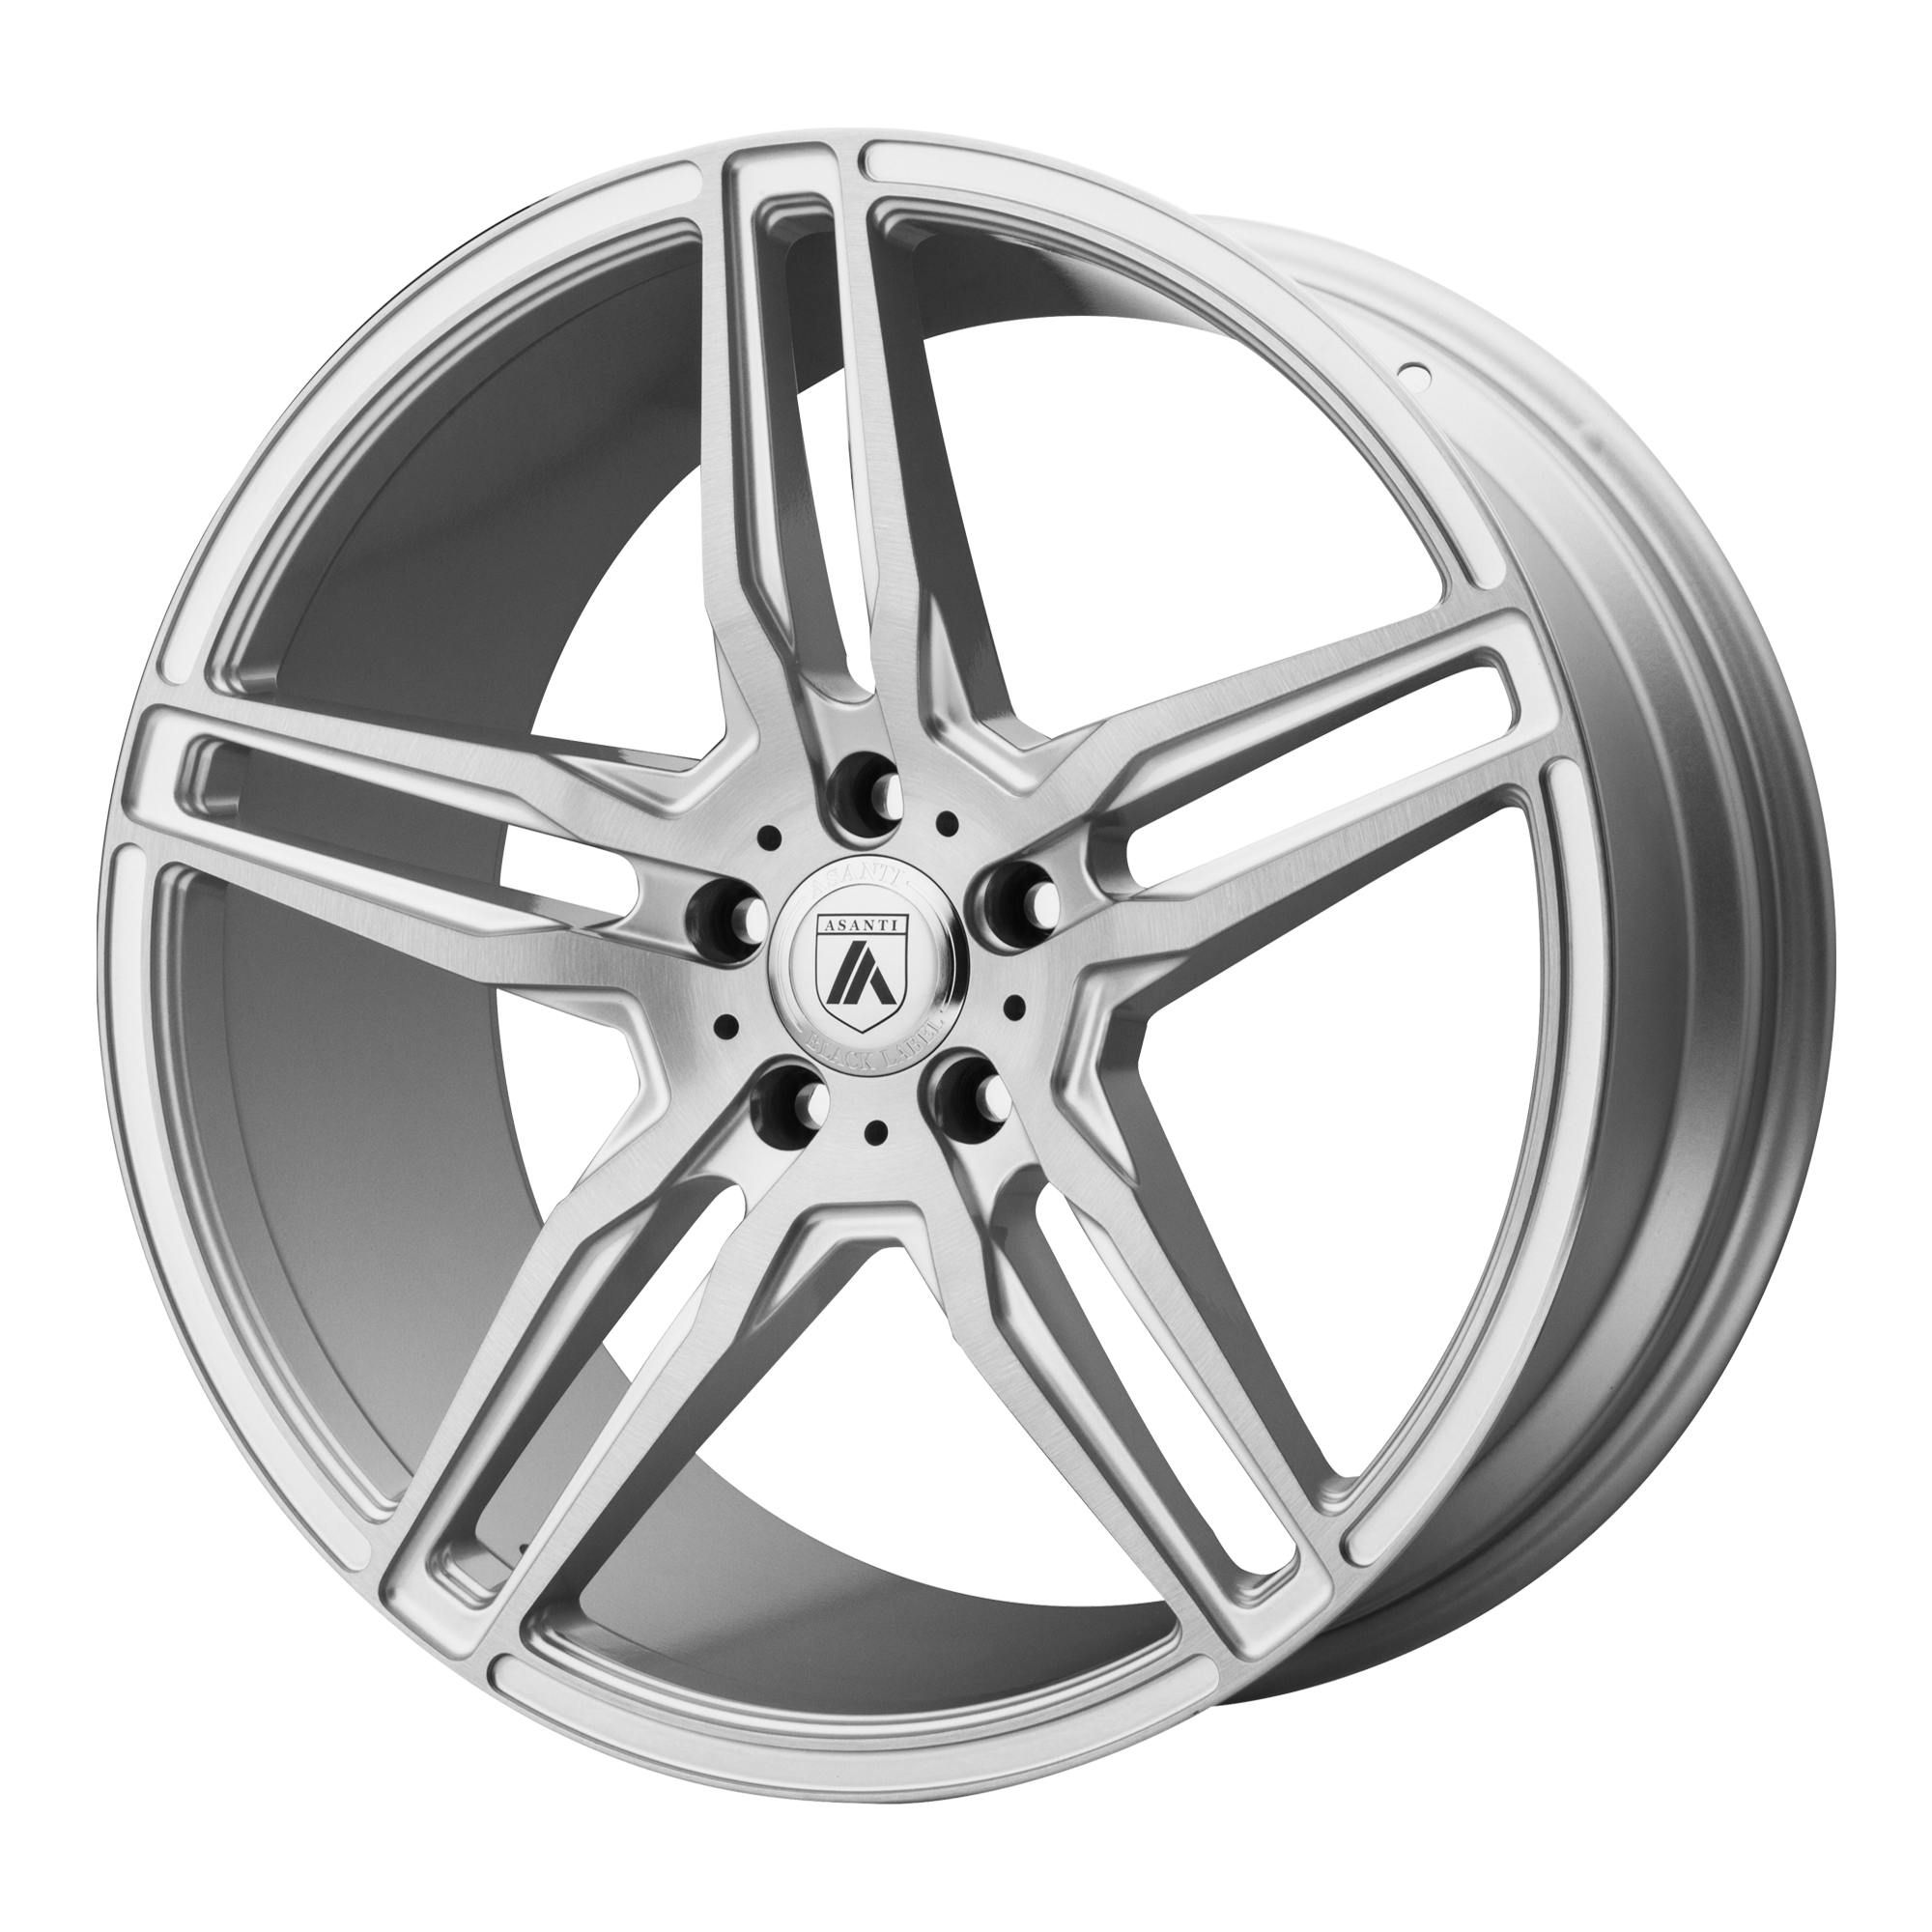 ORION 22x10.5 Blank BRUSHED SILVER (35.00 - 45.00 mm) - Tires and Engine Performance